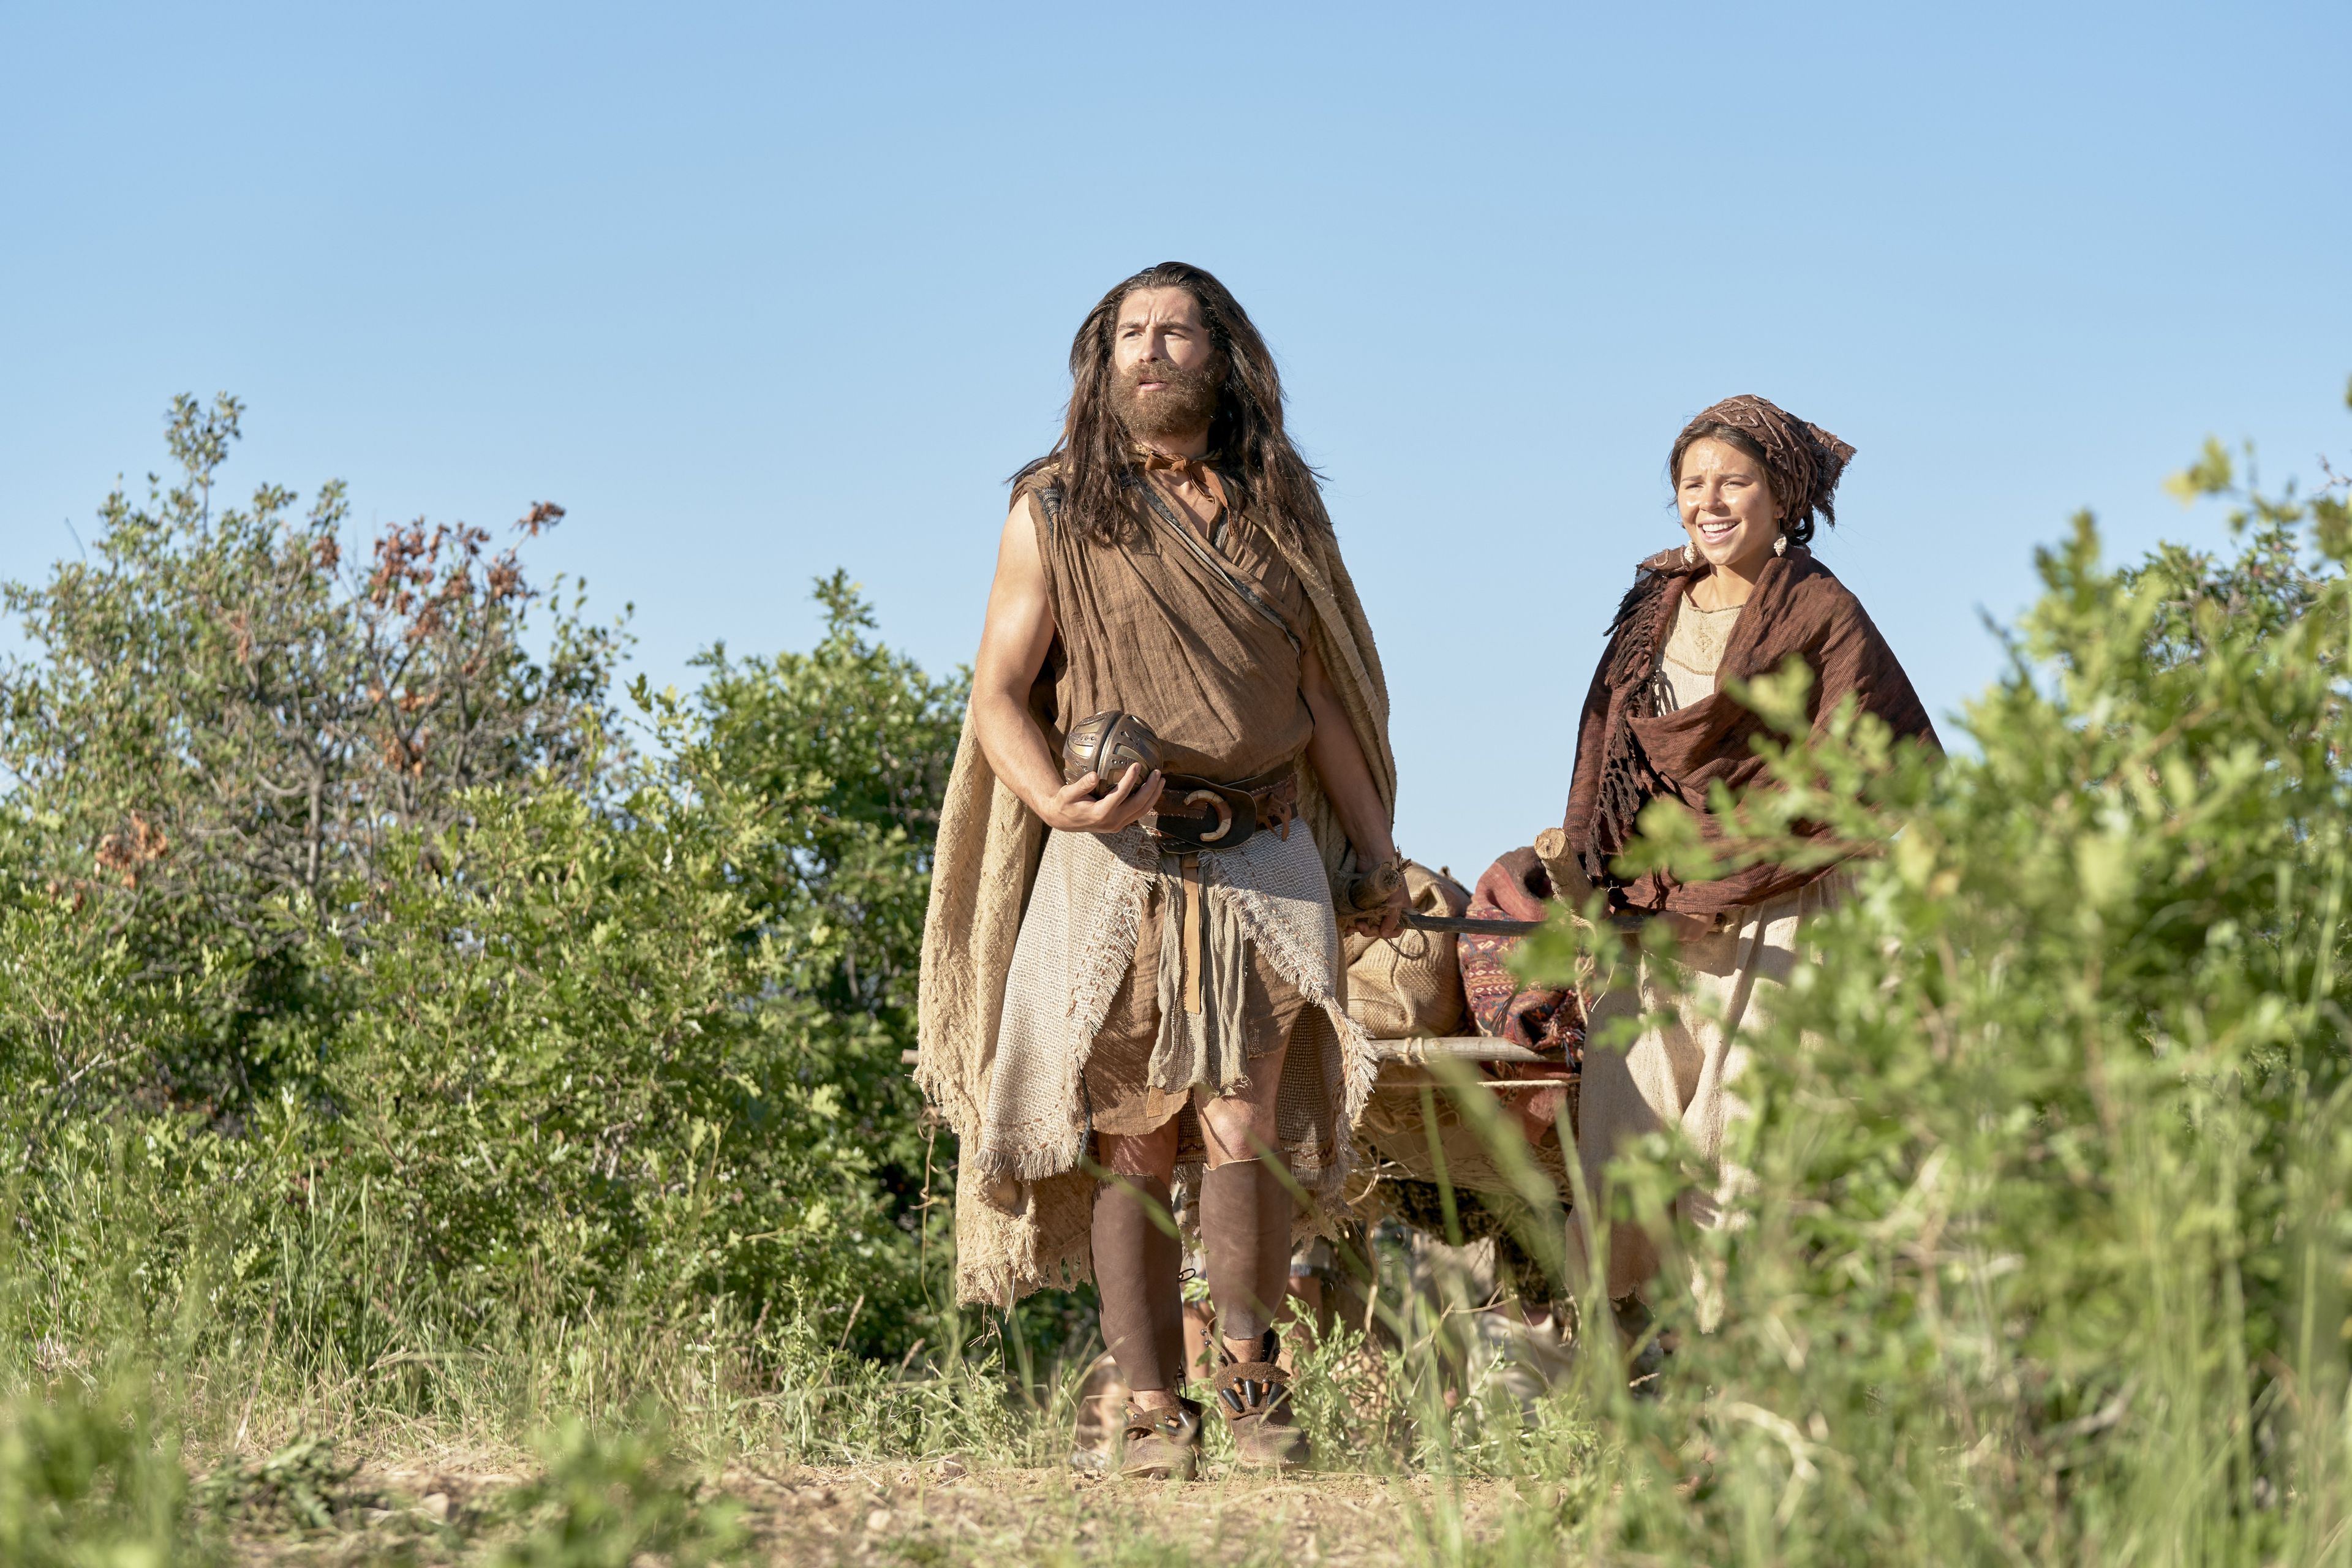 Nephi holds the Liahona, standing next to his wife.